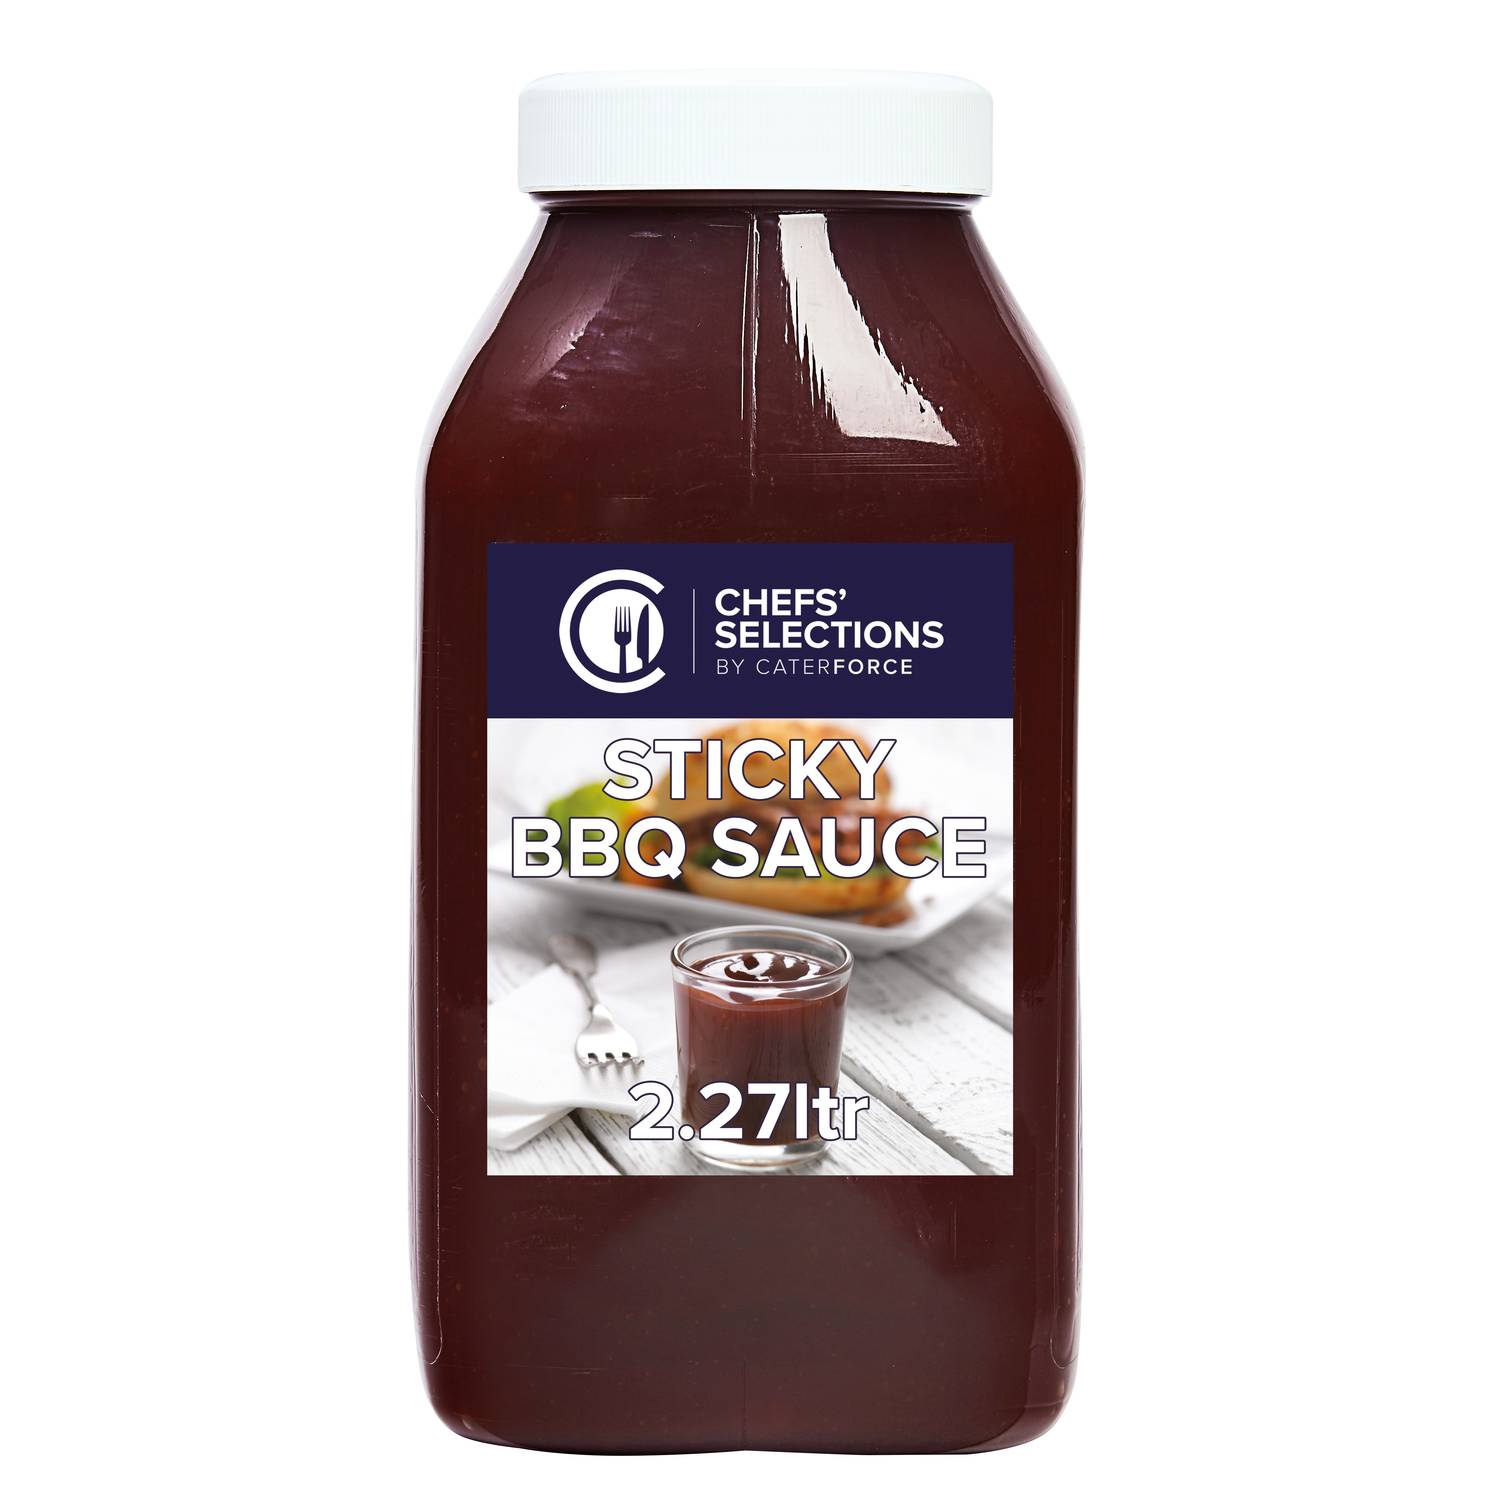 Chefs’ Selections Sticky BBQ Sauce (2 x 2.27L)